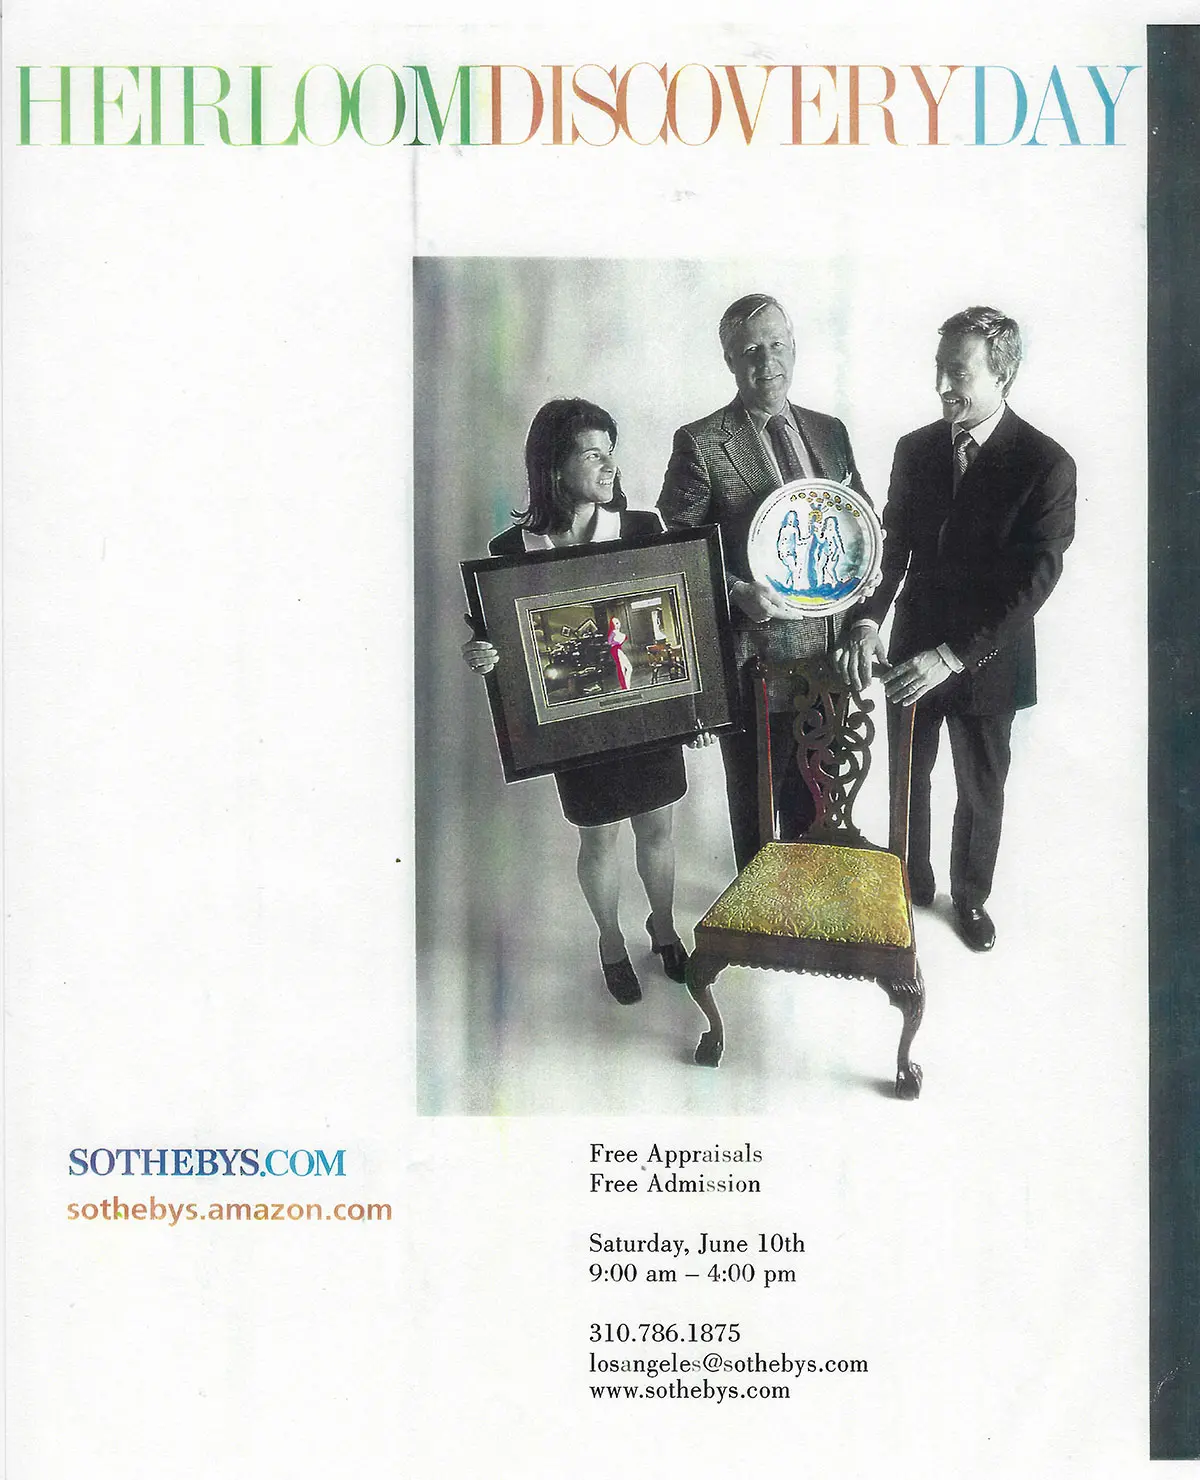 2000 Sothebys.com Advertisement With Colleagues Chris Jussel And Leigh Keno